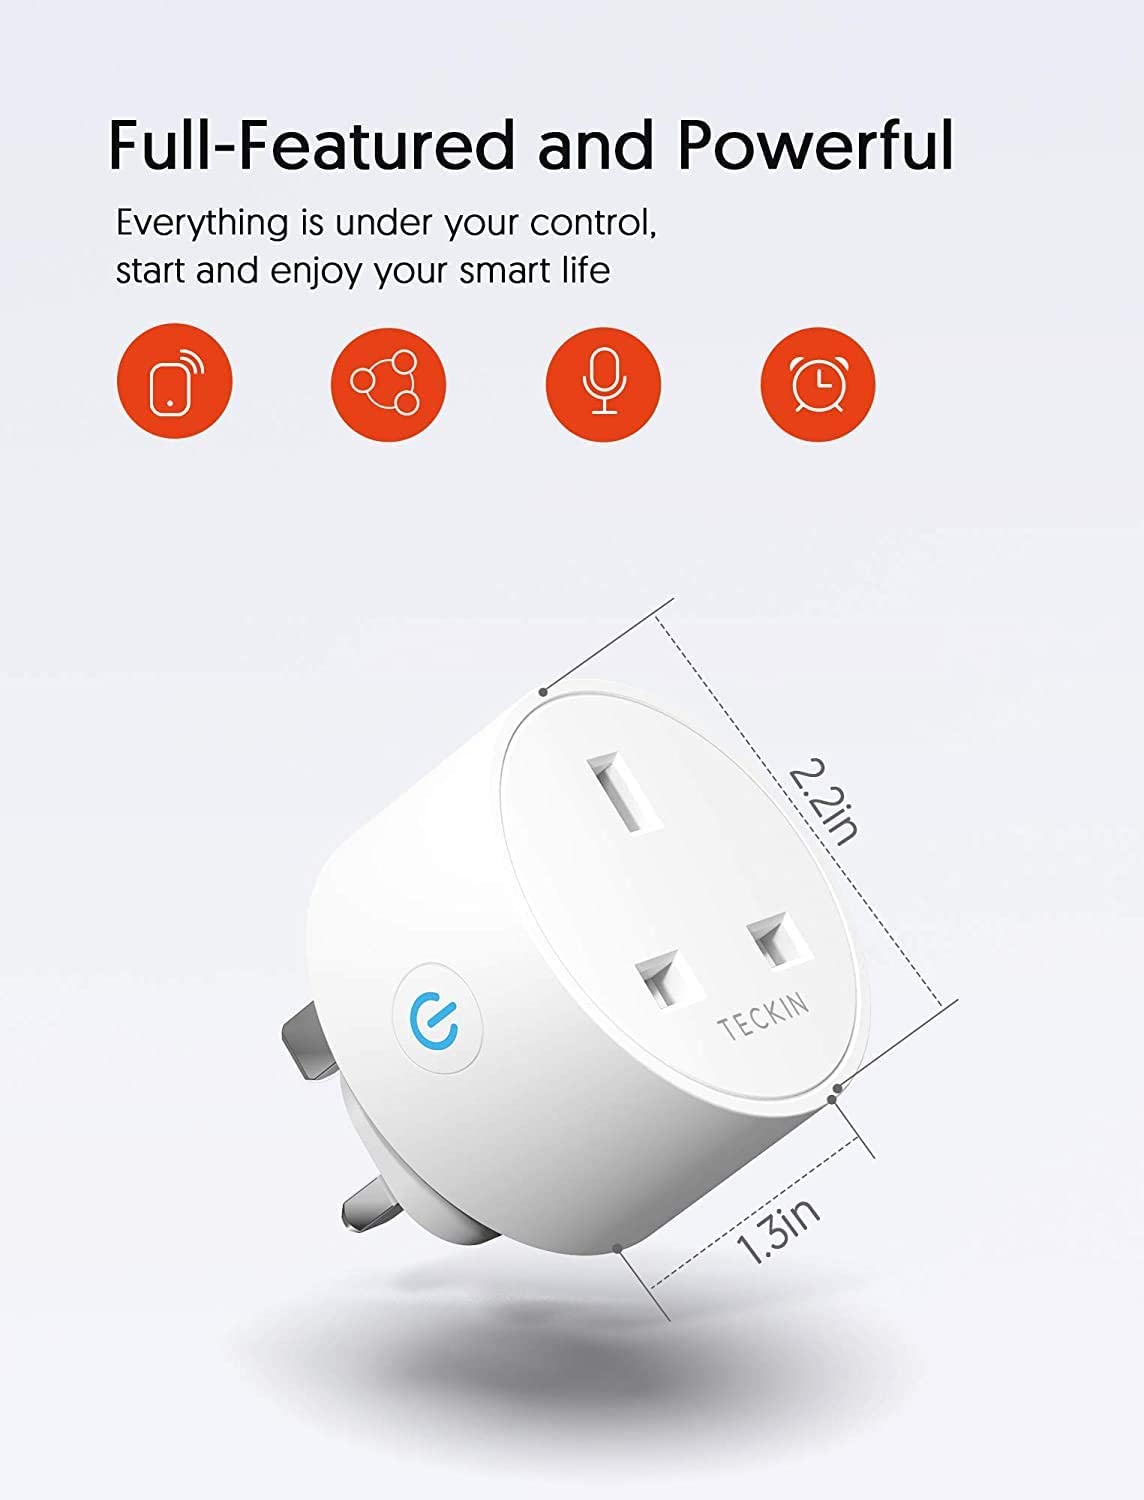 Teckin SP27/SP23 Smart Plug (New and old versions are shipped randomly)